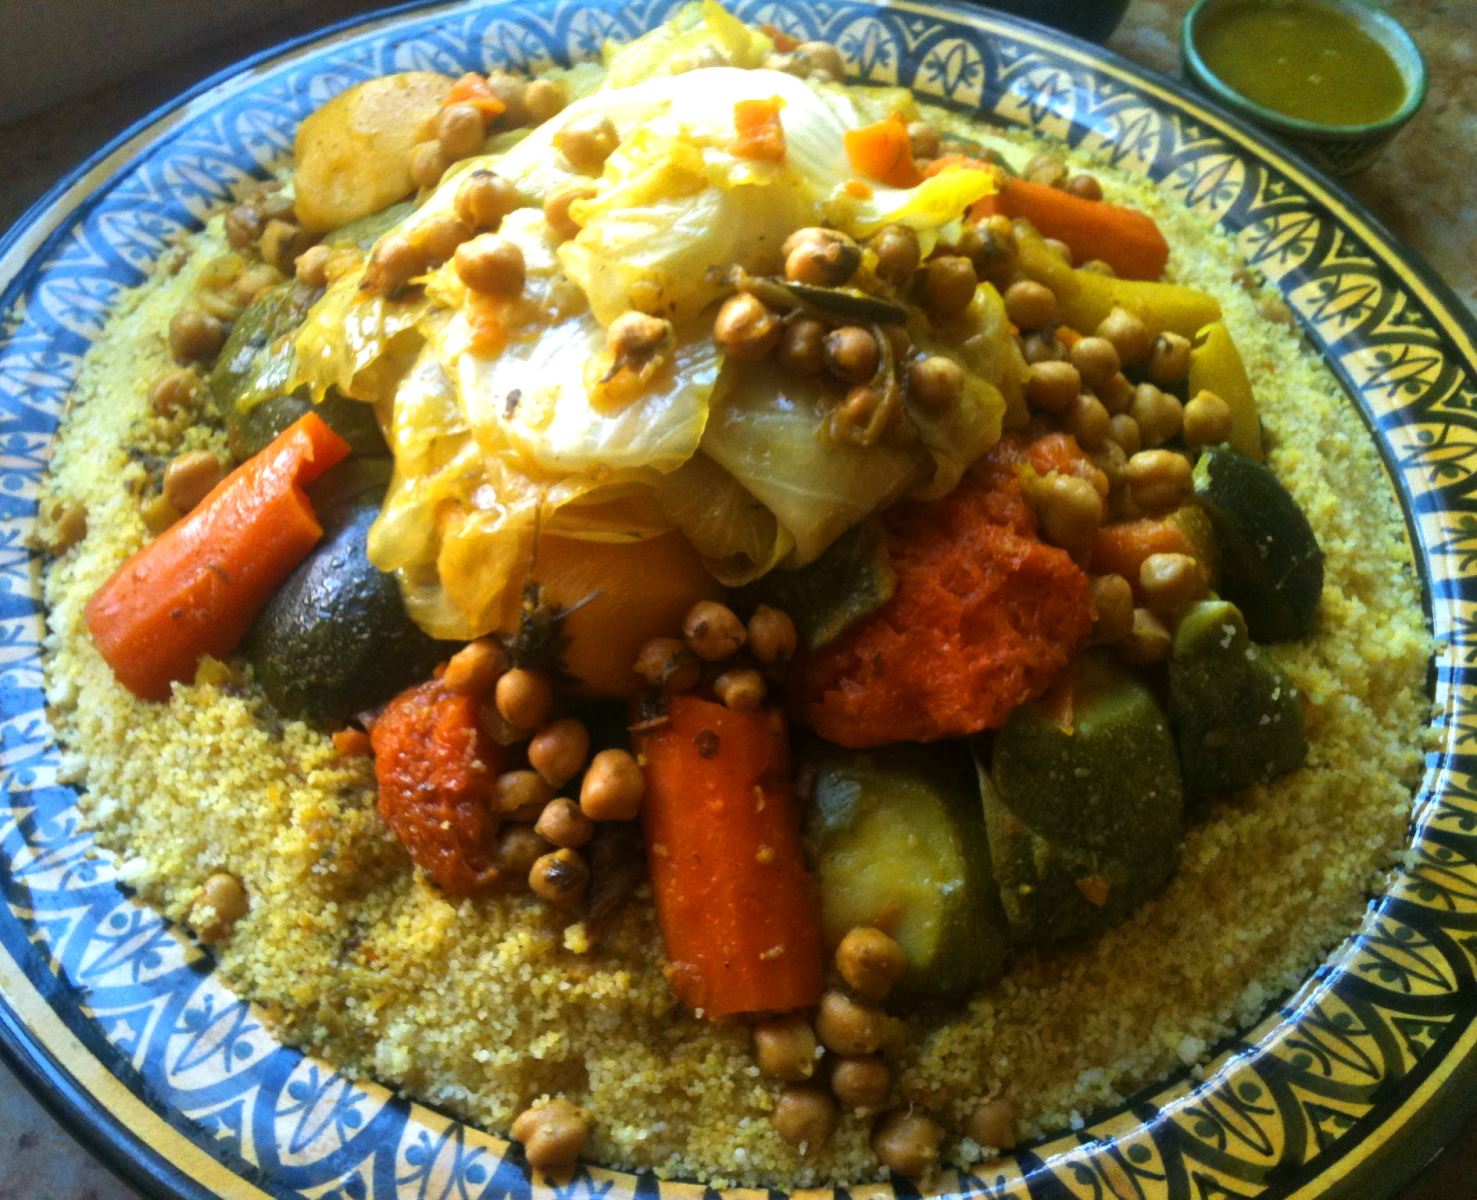 Rent a car in Morocco to go to eat a couscous in a local restaurant